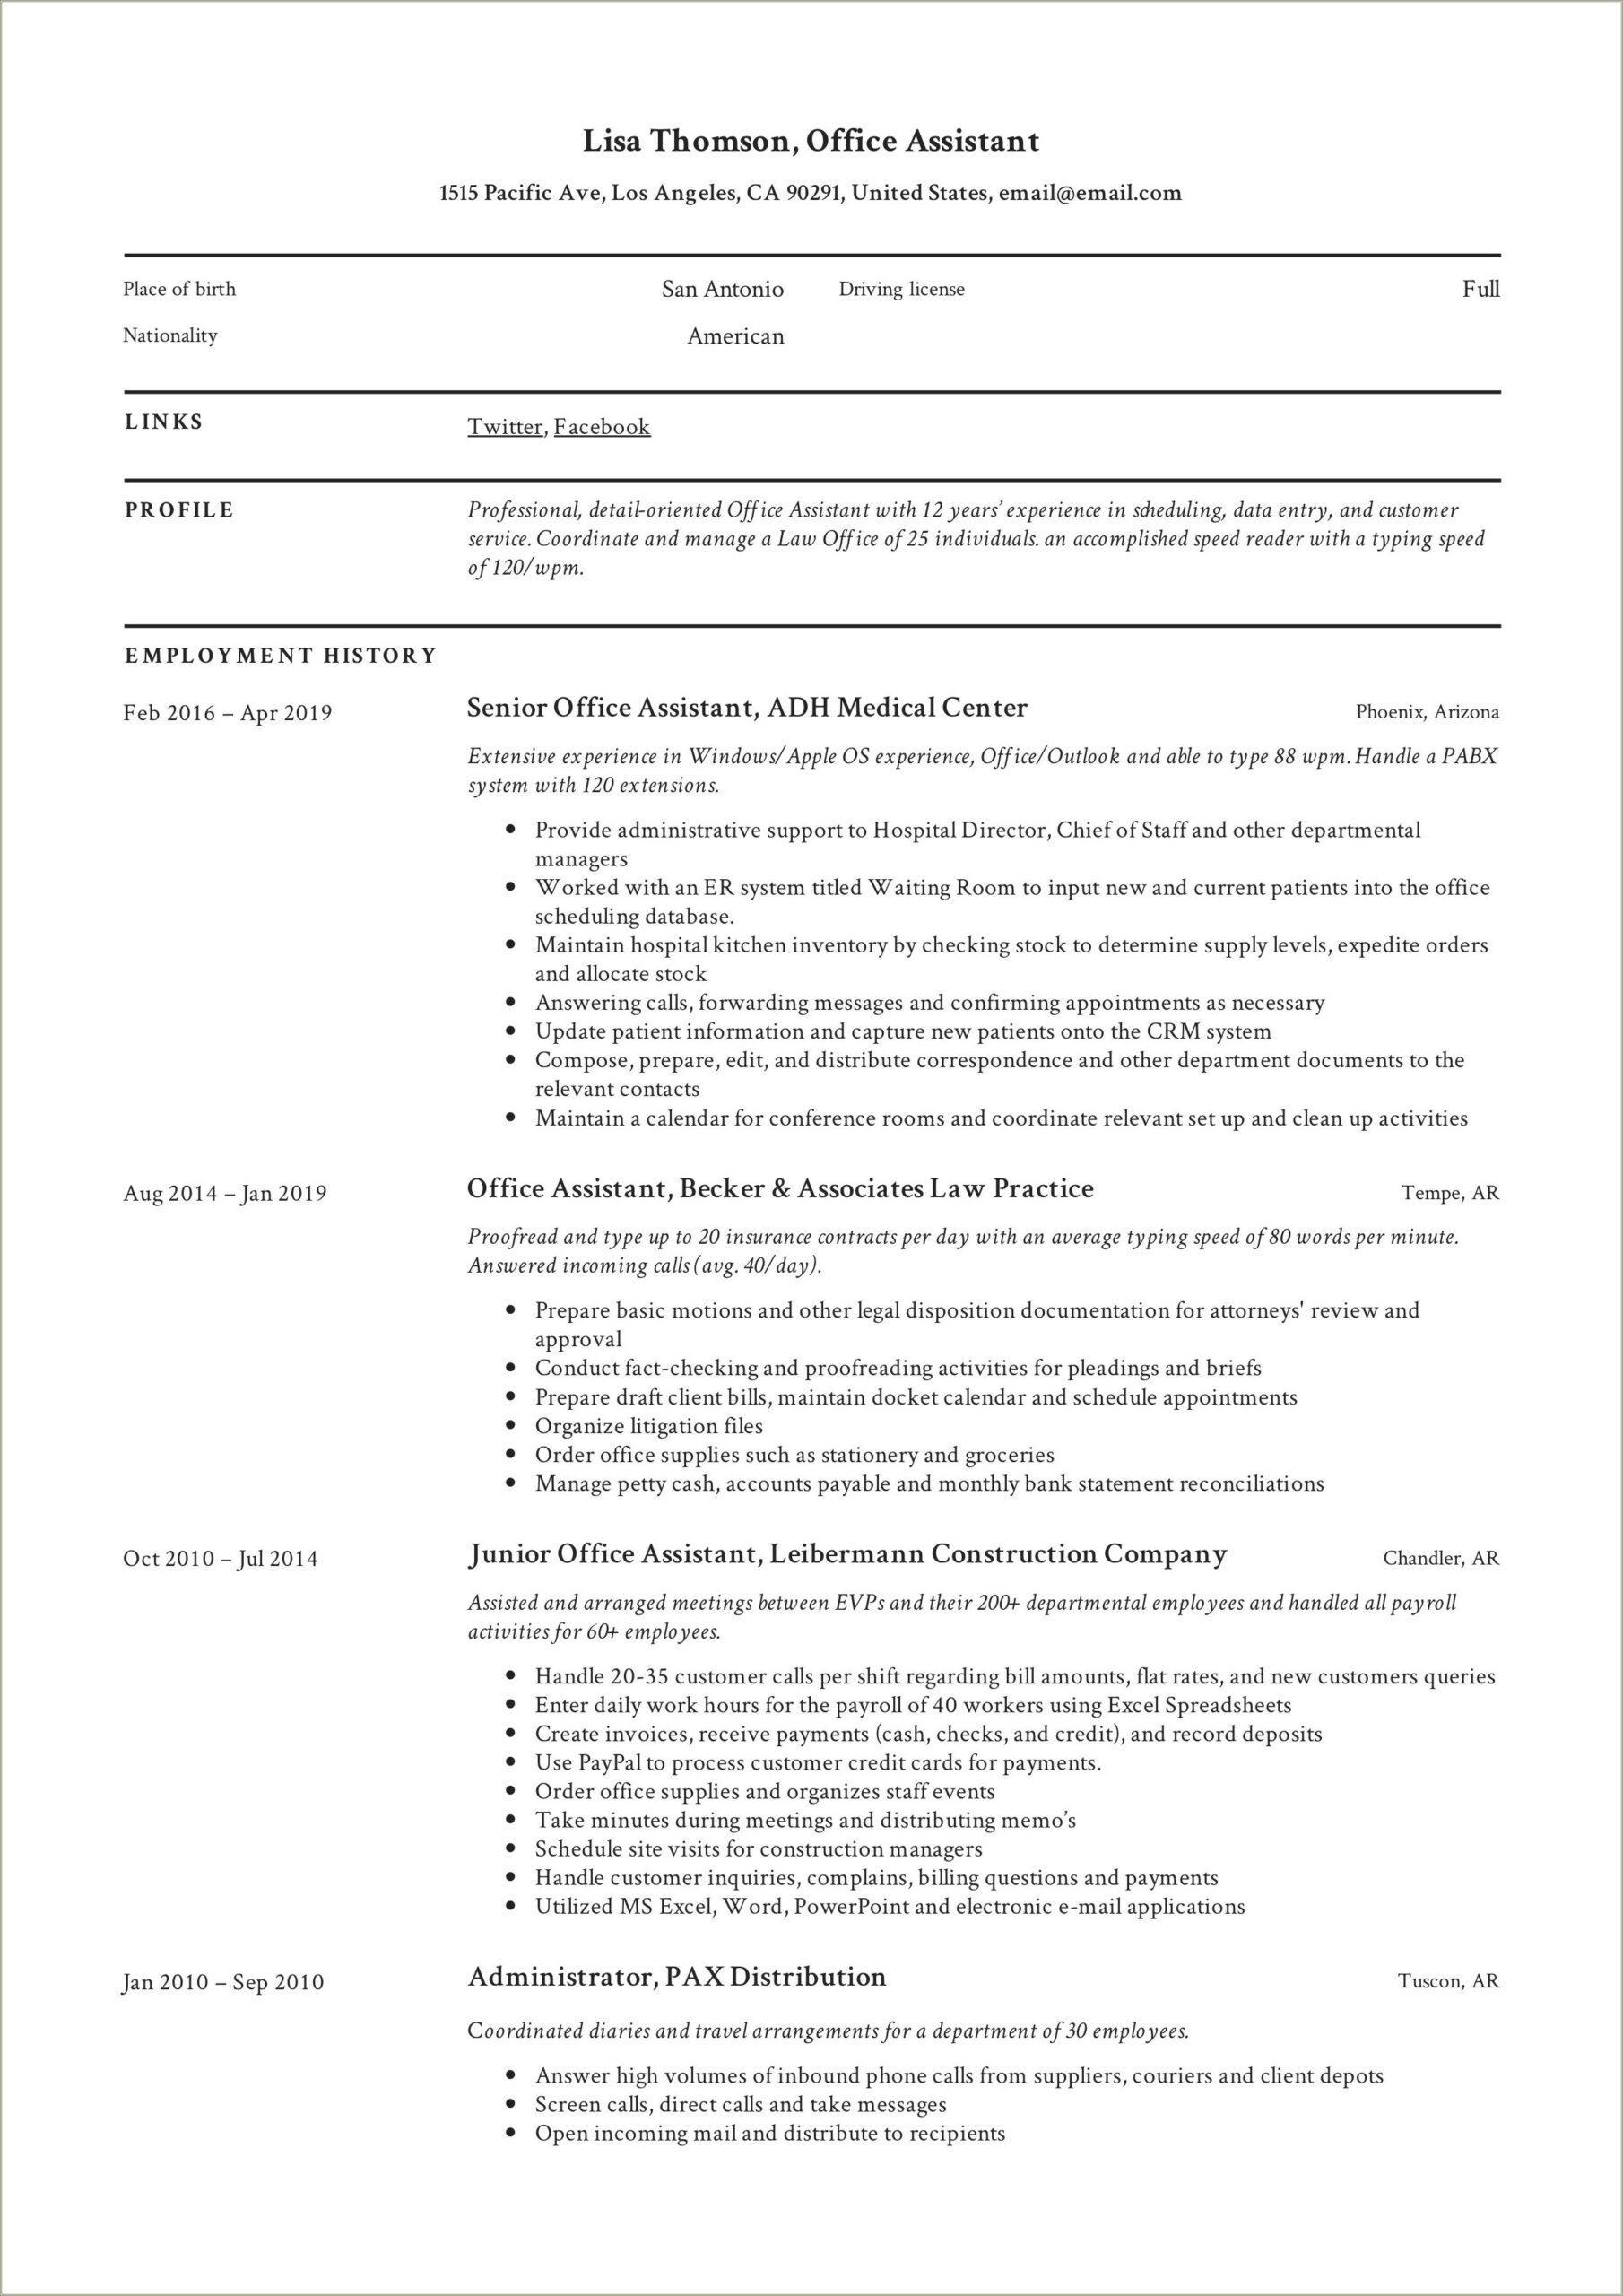 Sample Executive Assistant Resume With Gaps In Employment